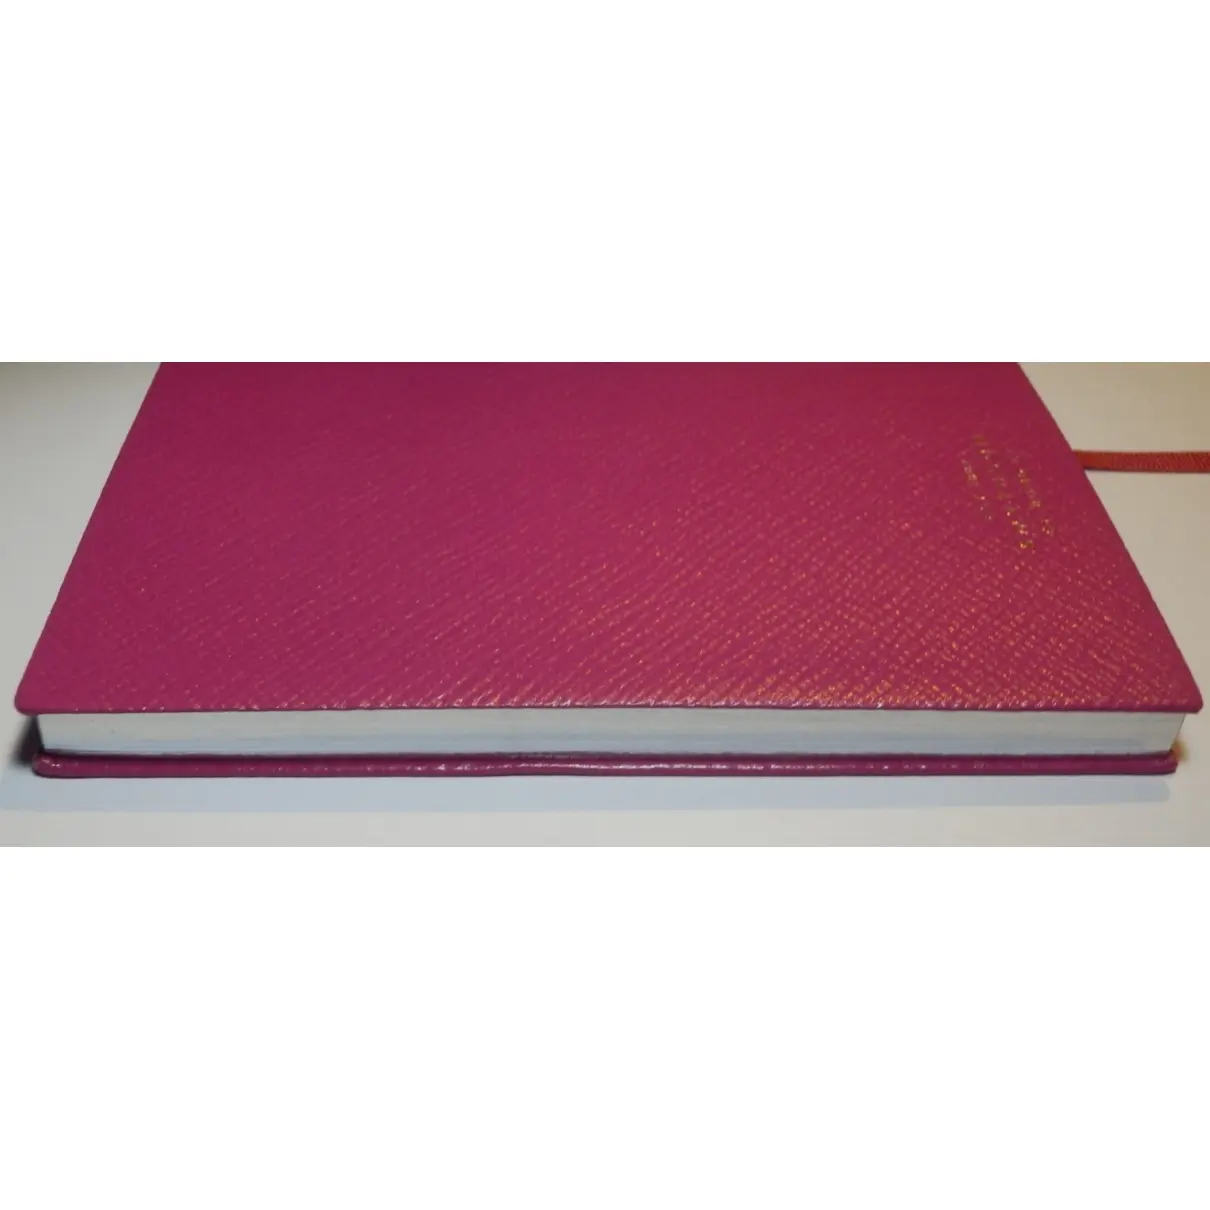 Buy Smythson Leather diary online